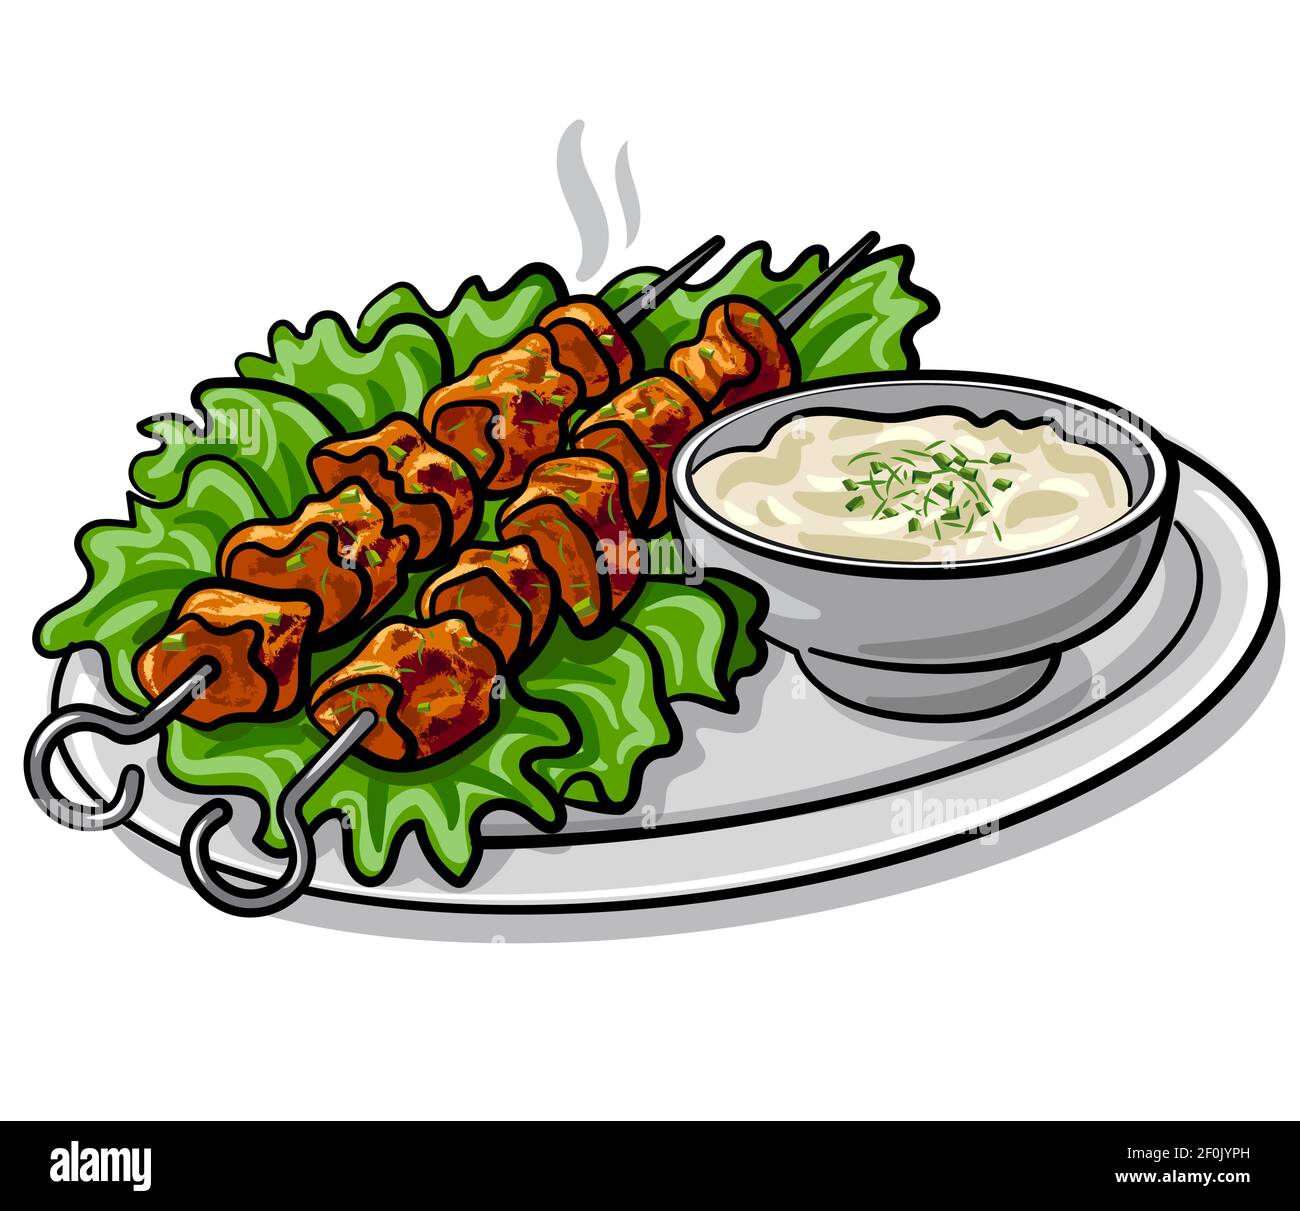 illustration of the shish tawook kebab with sauce and lettuce on the plate Stock Vector